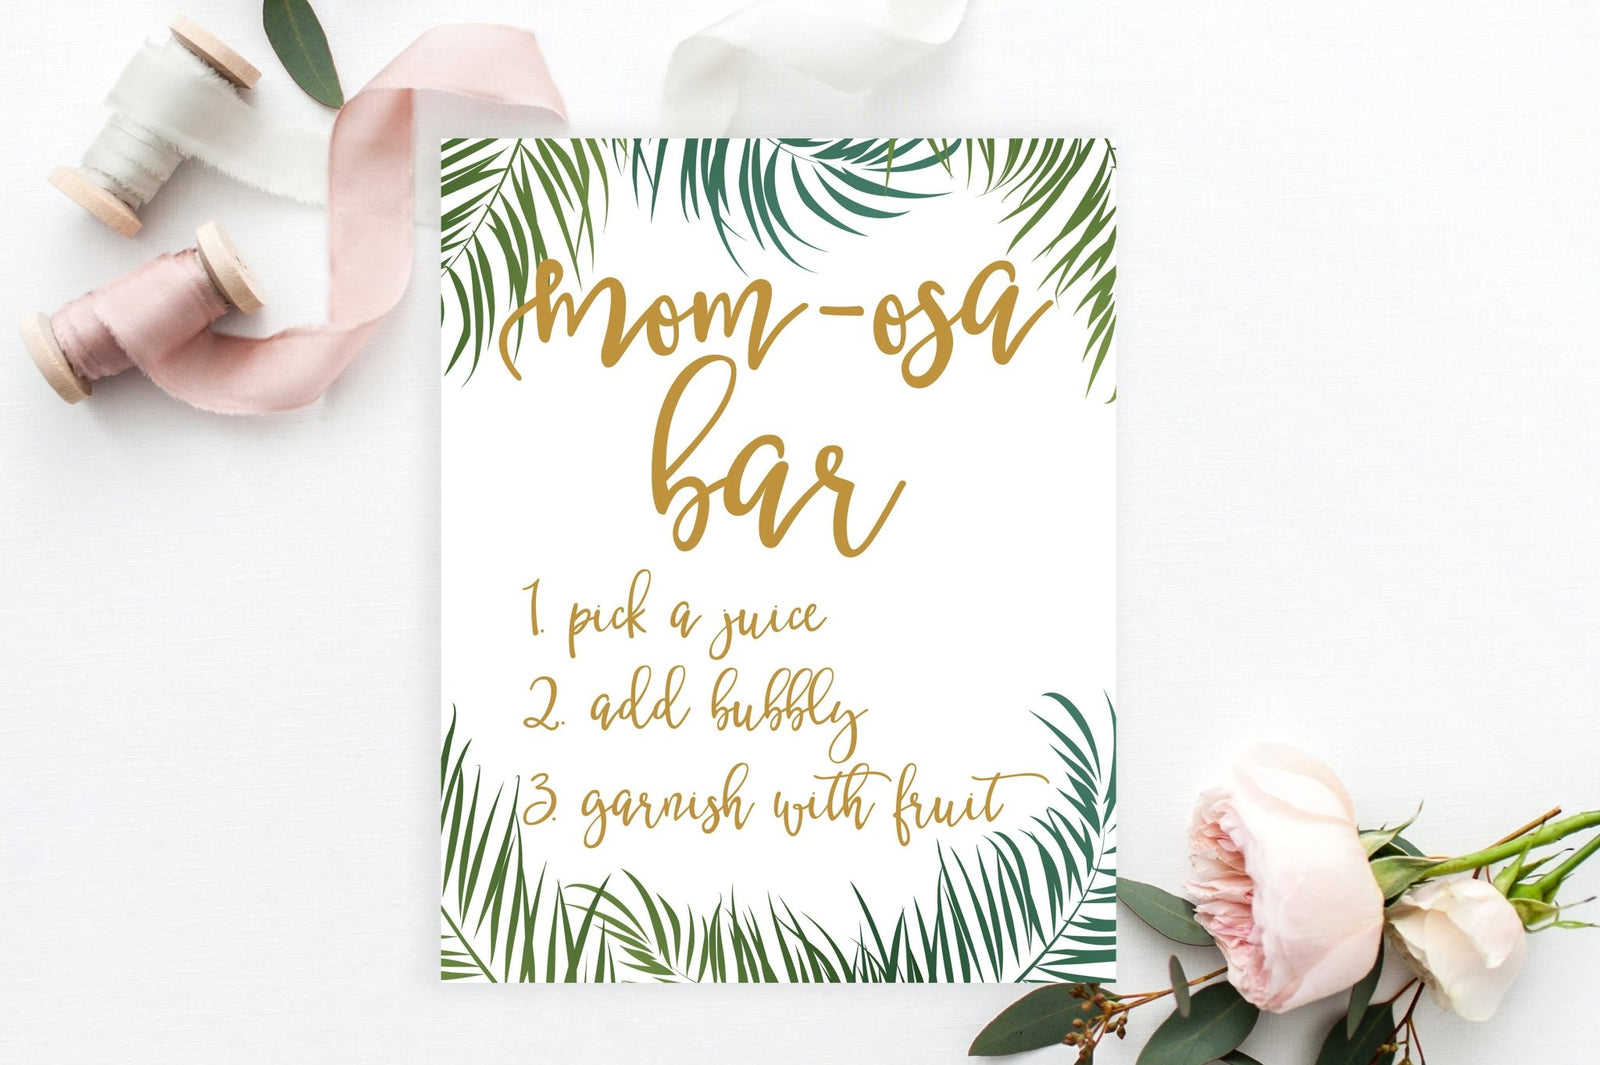 Baby Shower Welcome Sign - Tropical Printable - Pretty Collected